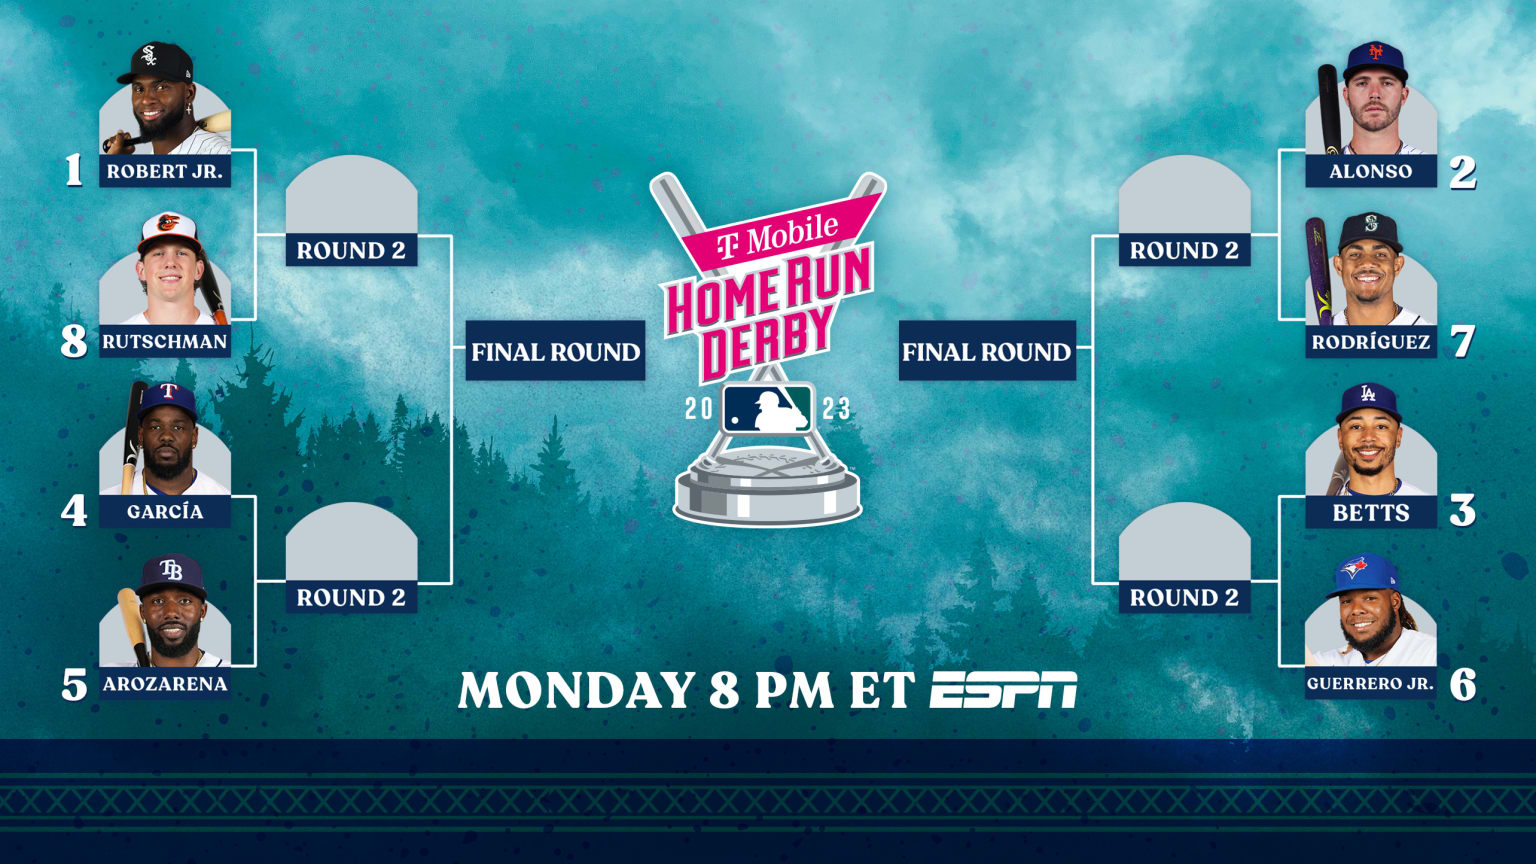 Texas Rangers - Make your picks for the T-Mobile Home Run Derby